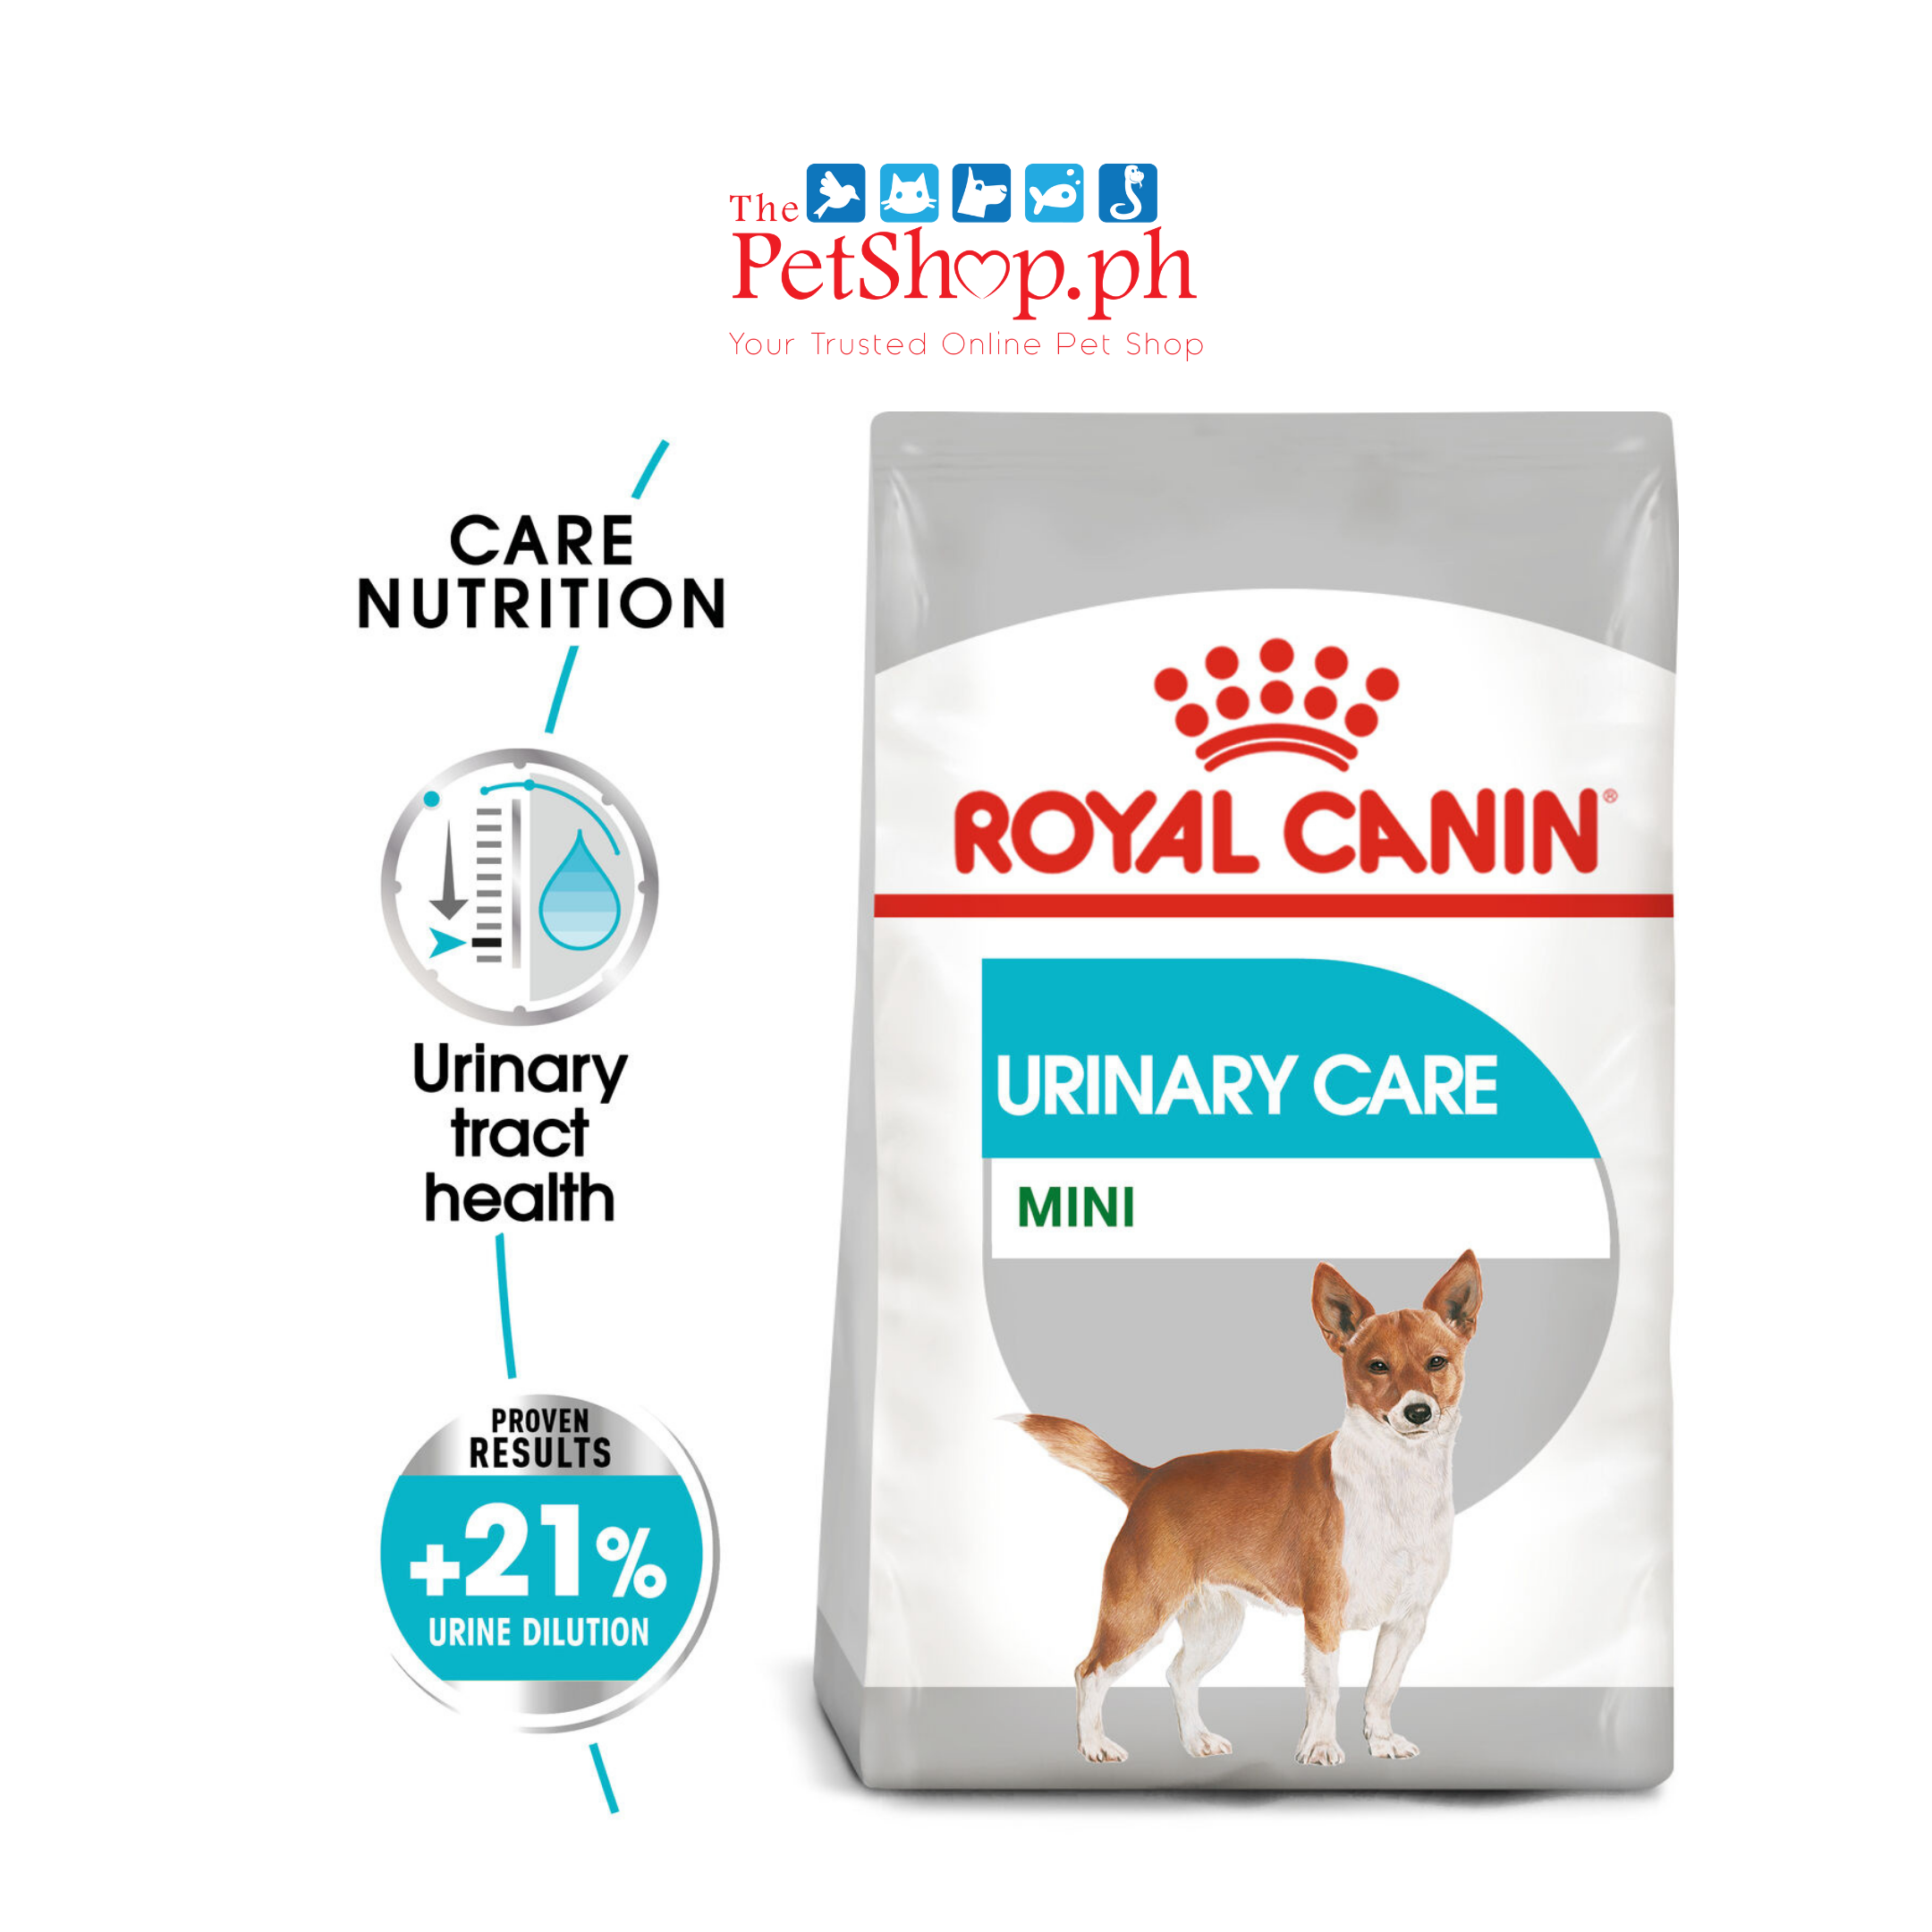 Royal Canin Mini Urinary Care 1kg Adult Dry Dog Food - Canine Care Nutrition